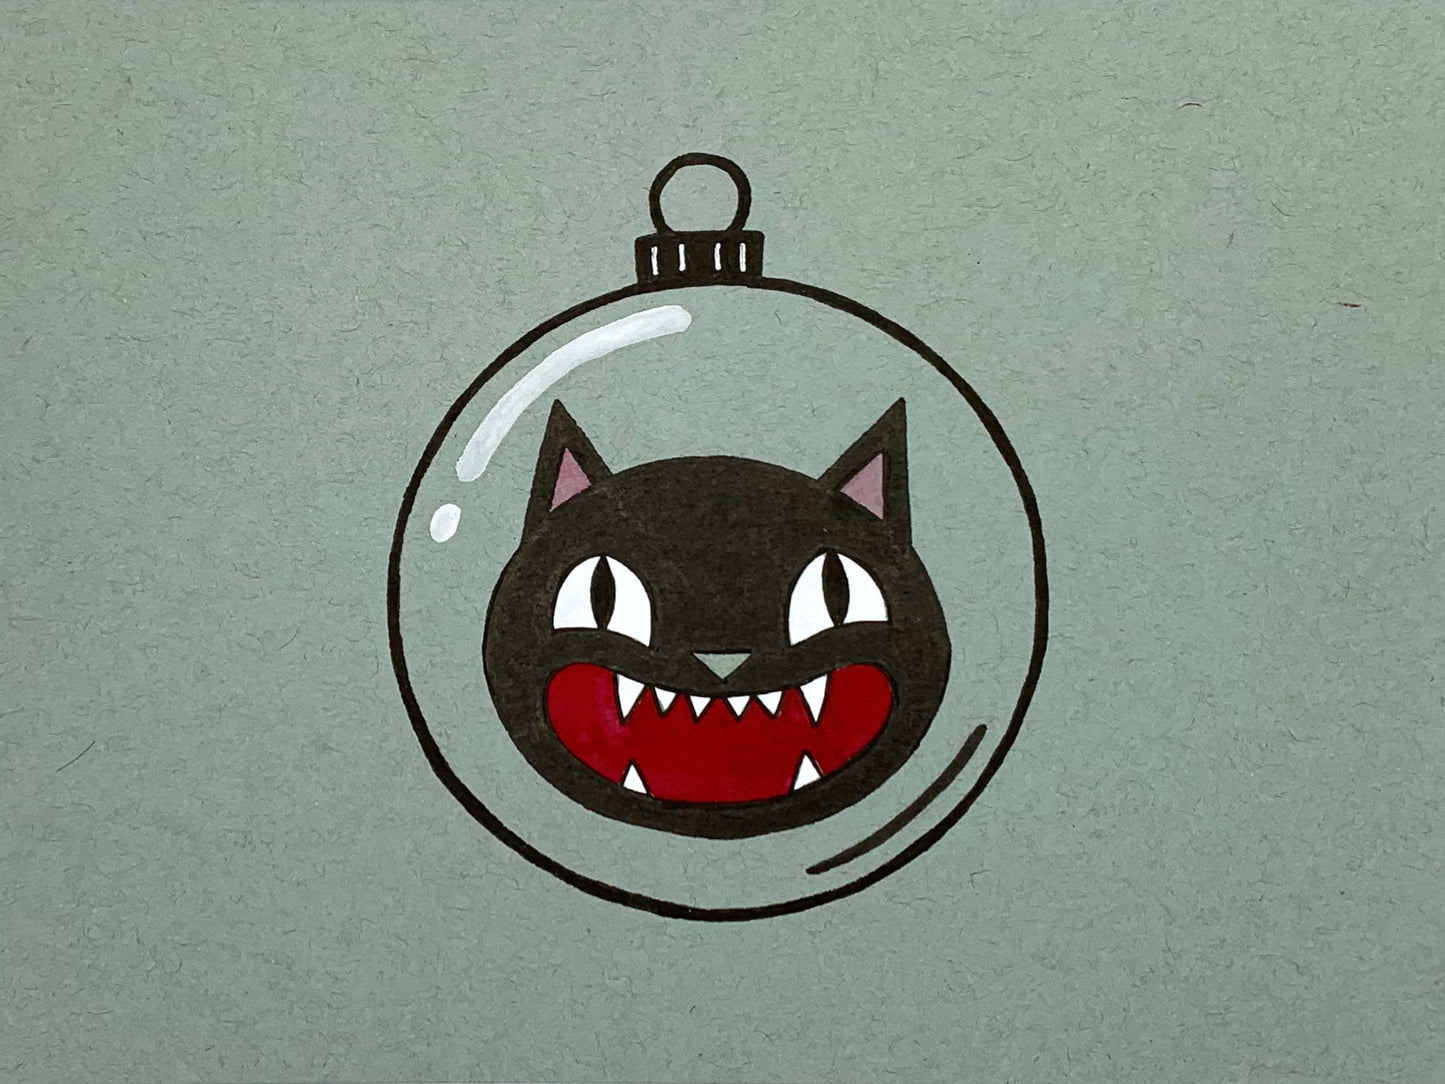 Original illustration of a vintage looking screaming cat inside of a glass ornament, like a Halloween decoration. Made using ink, watercolor, and gouache.